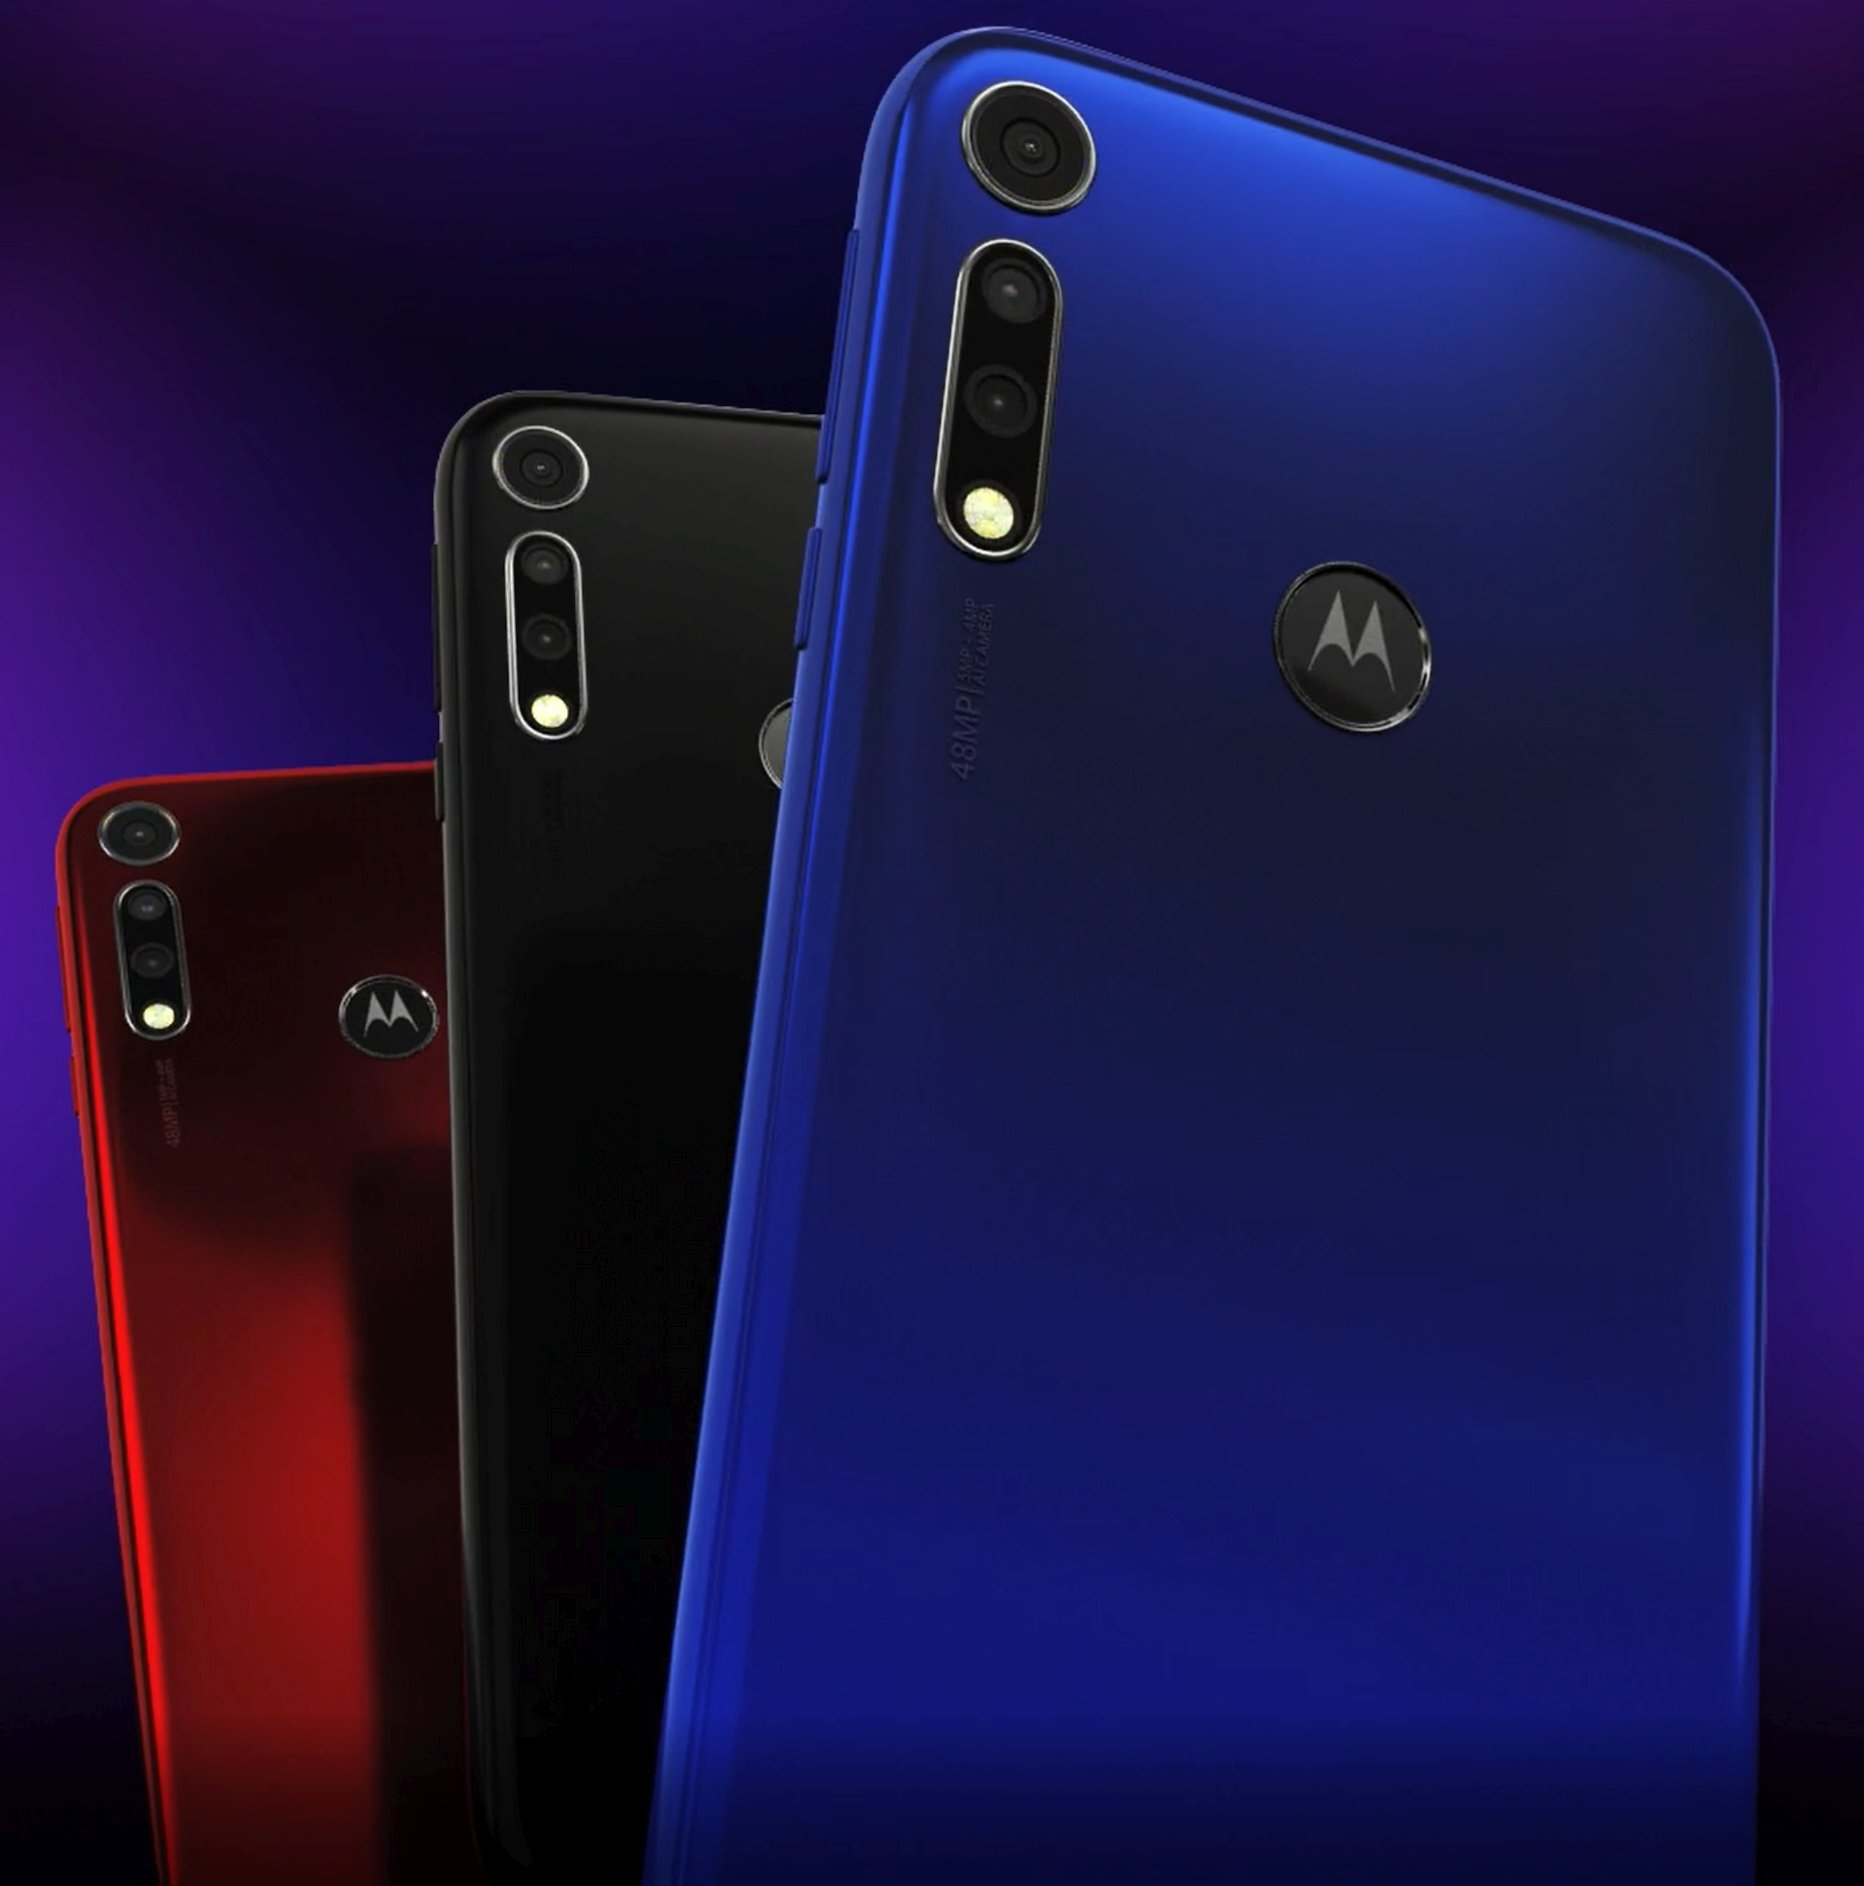 Moto G8 with water-drop notch display, triple rear cameras surfaces in promotional video ahead of official announcement